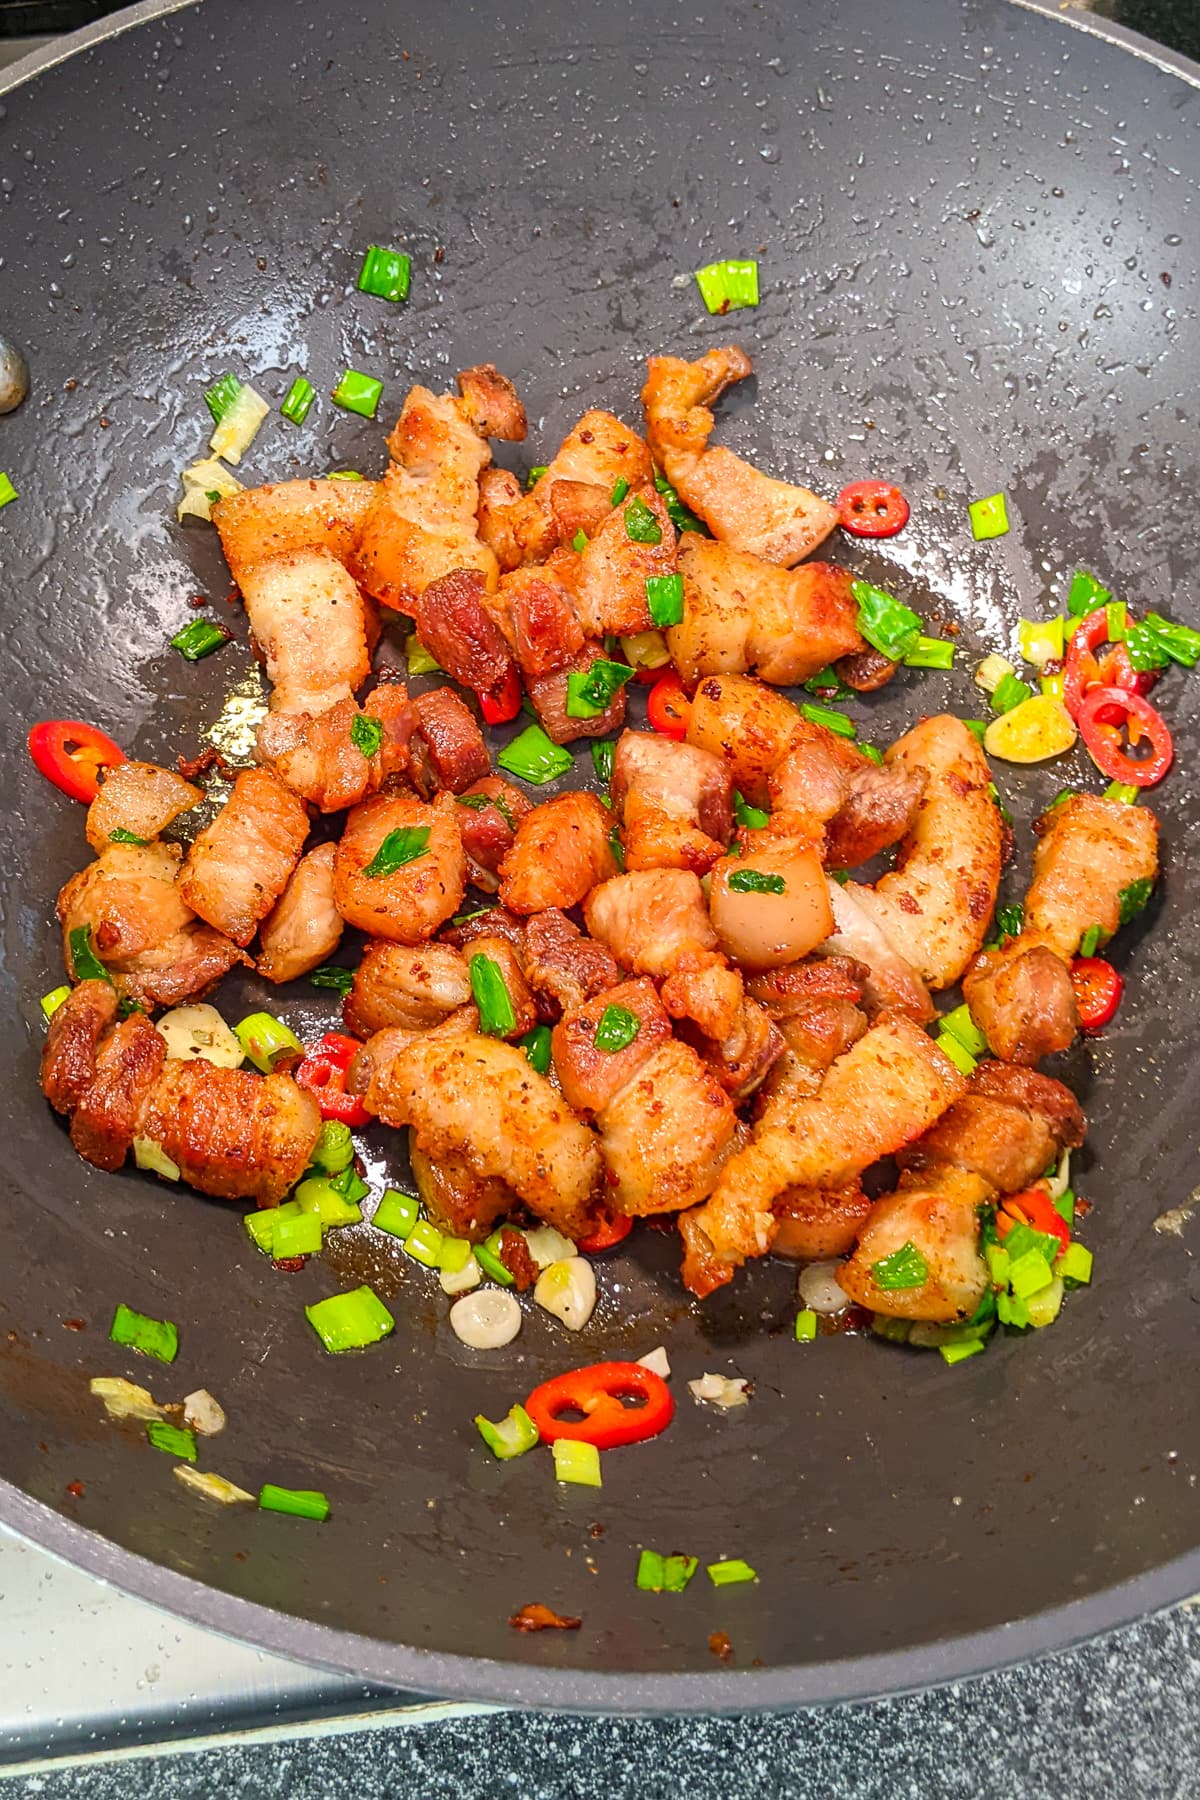 Frying pork belly with spring onions, chili pepper and garlic.